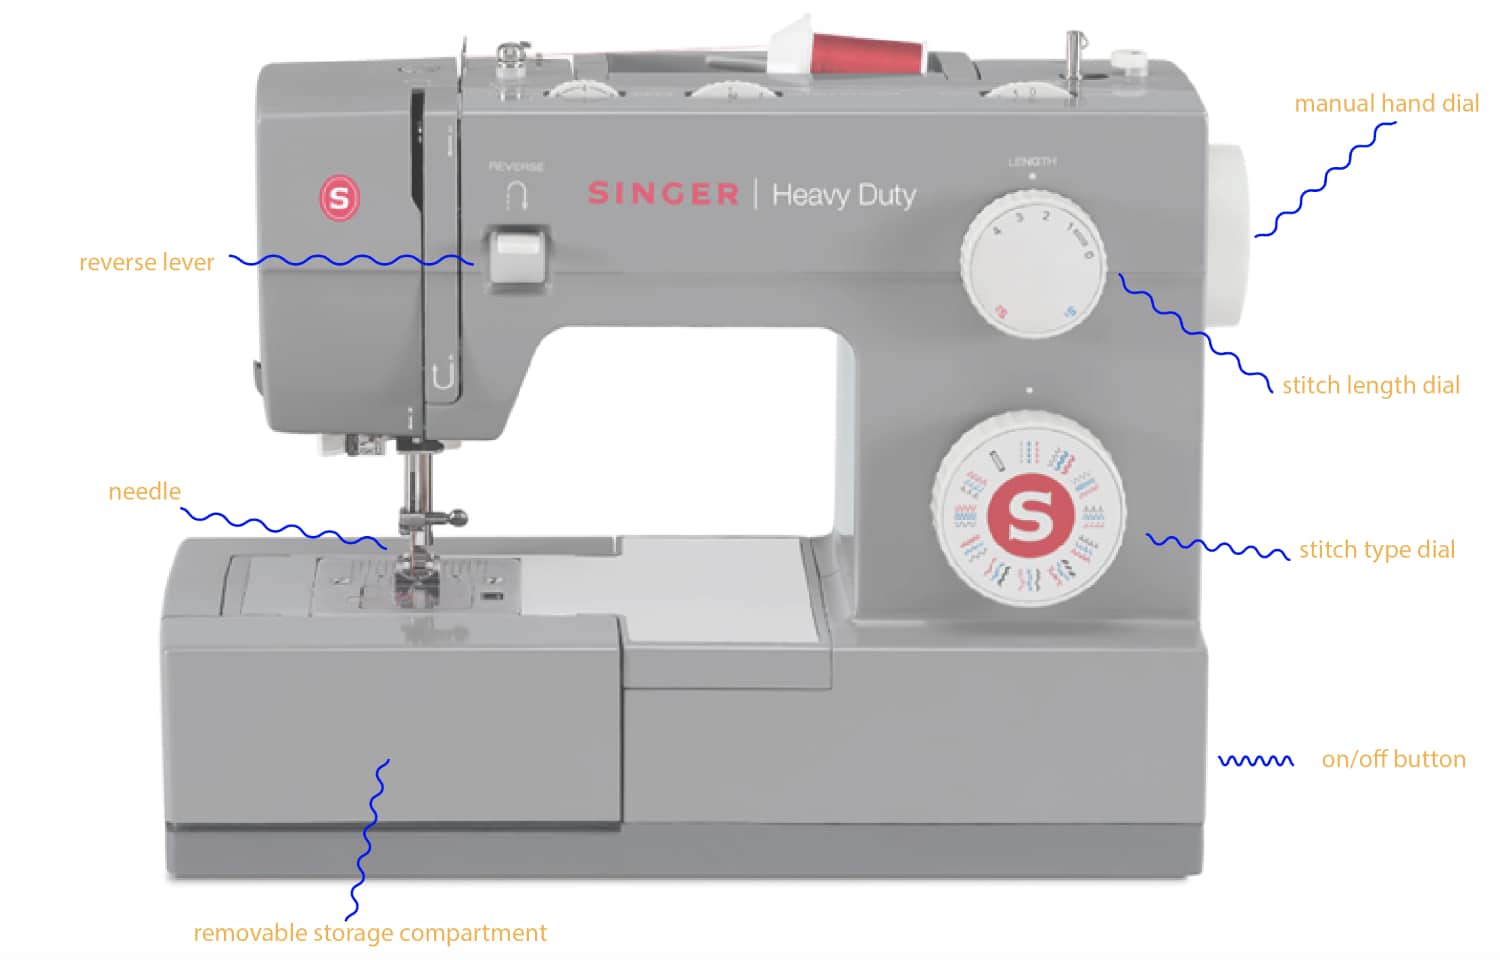 sewing machine modes and settings